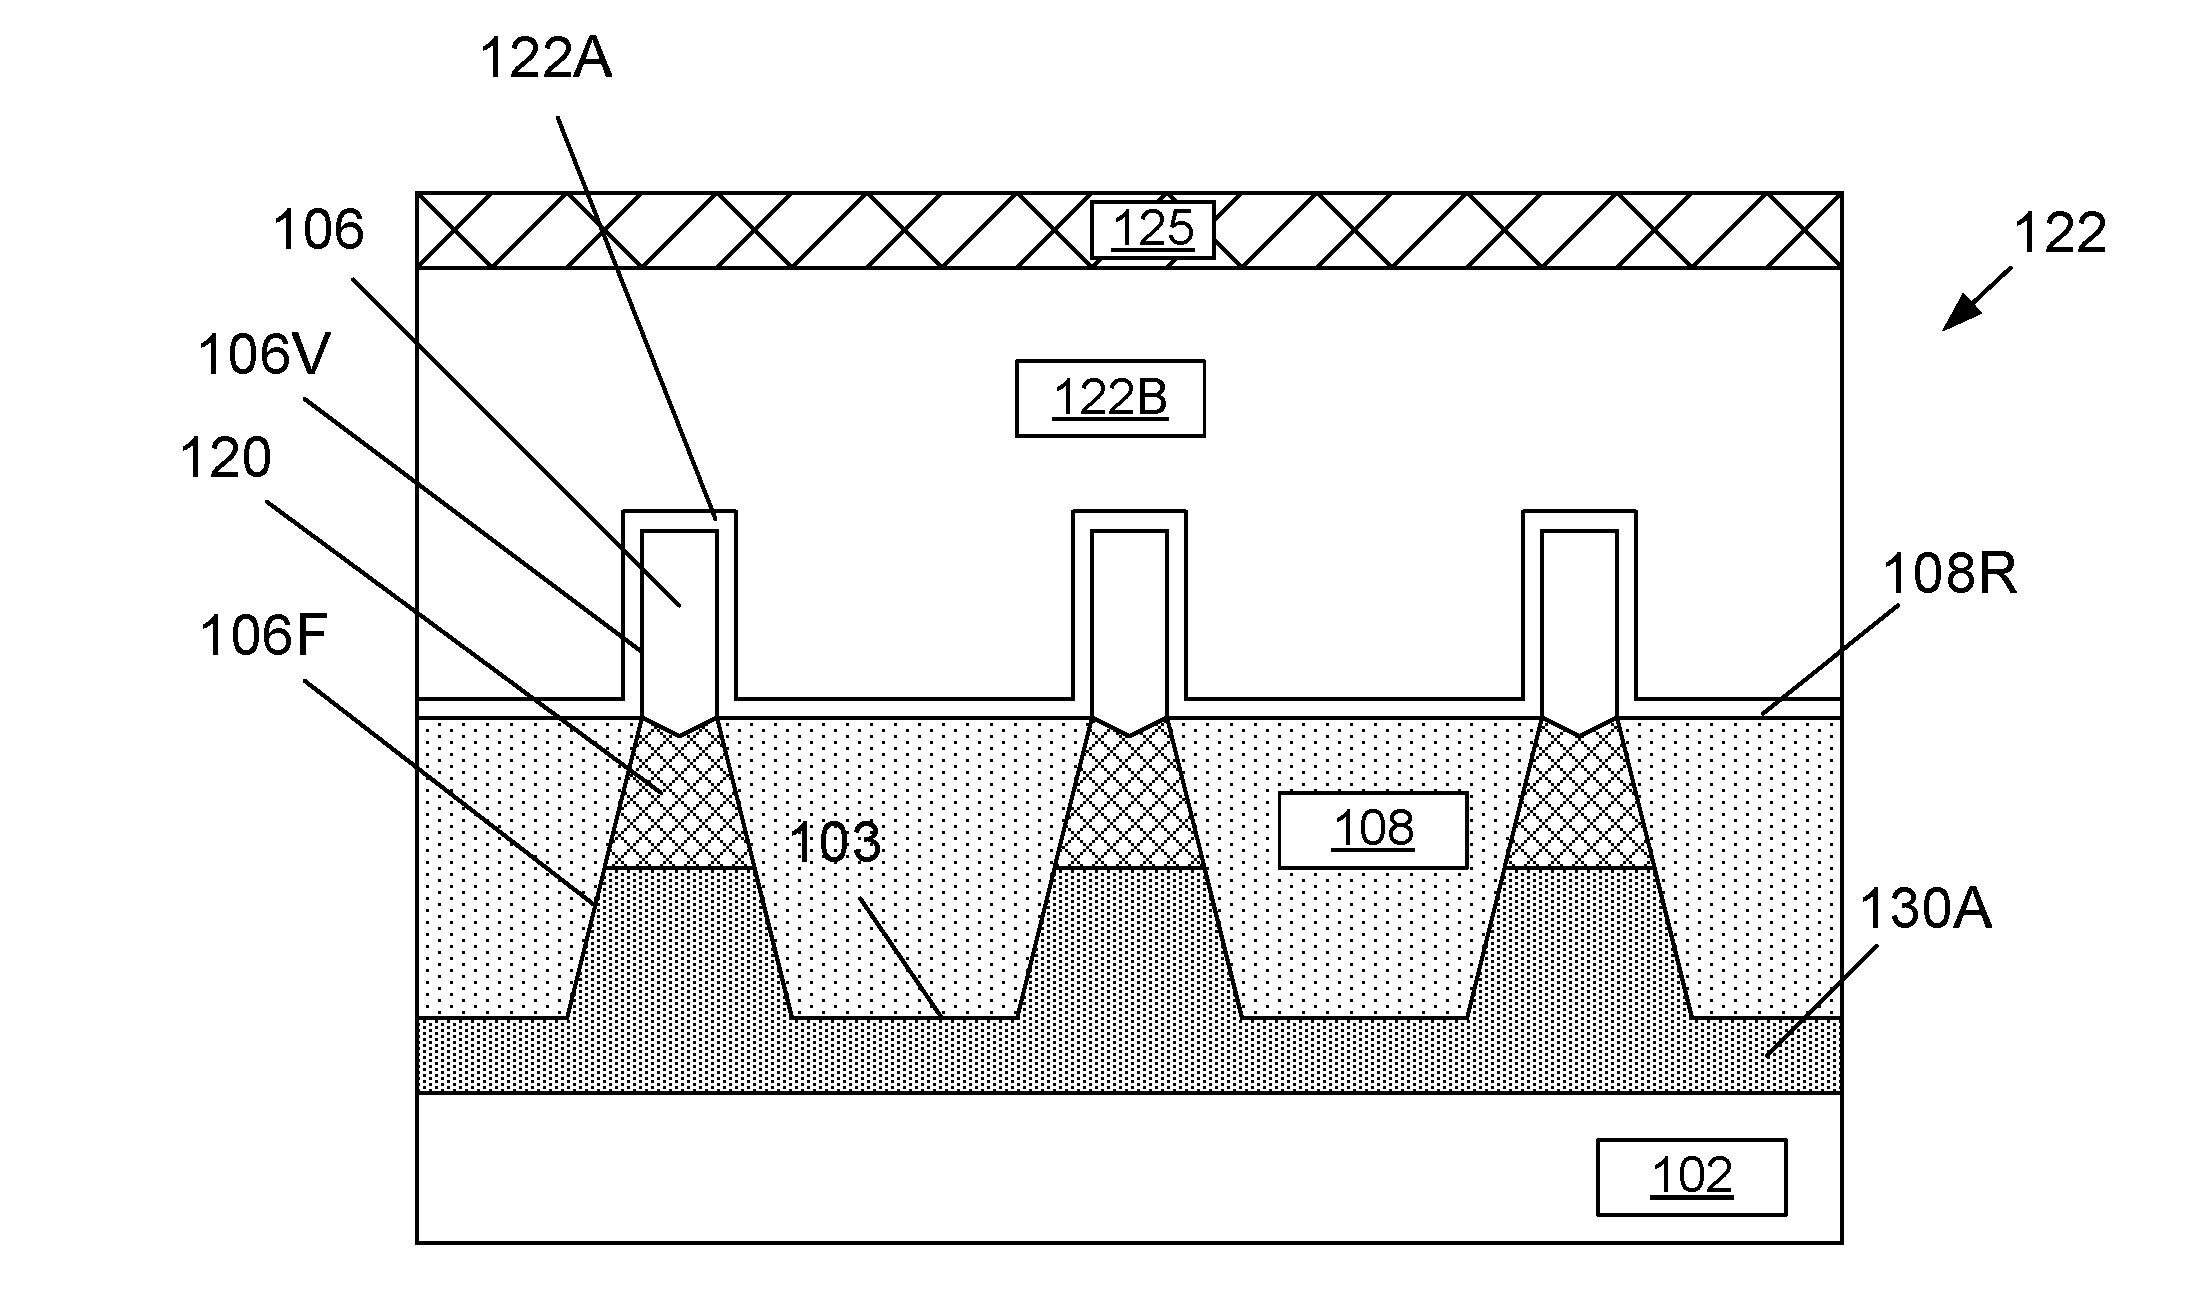 Methods of forming fin isolation regions on finfet semiconductor devices using an oxidation-blocking layer of material and by performing a fin-trimming process